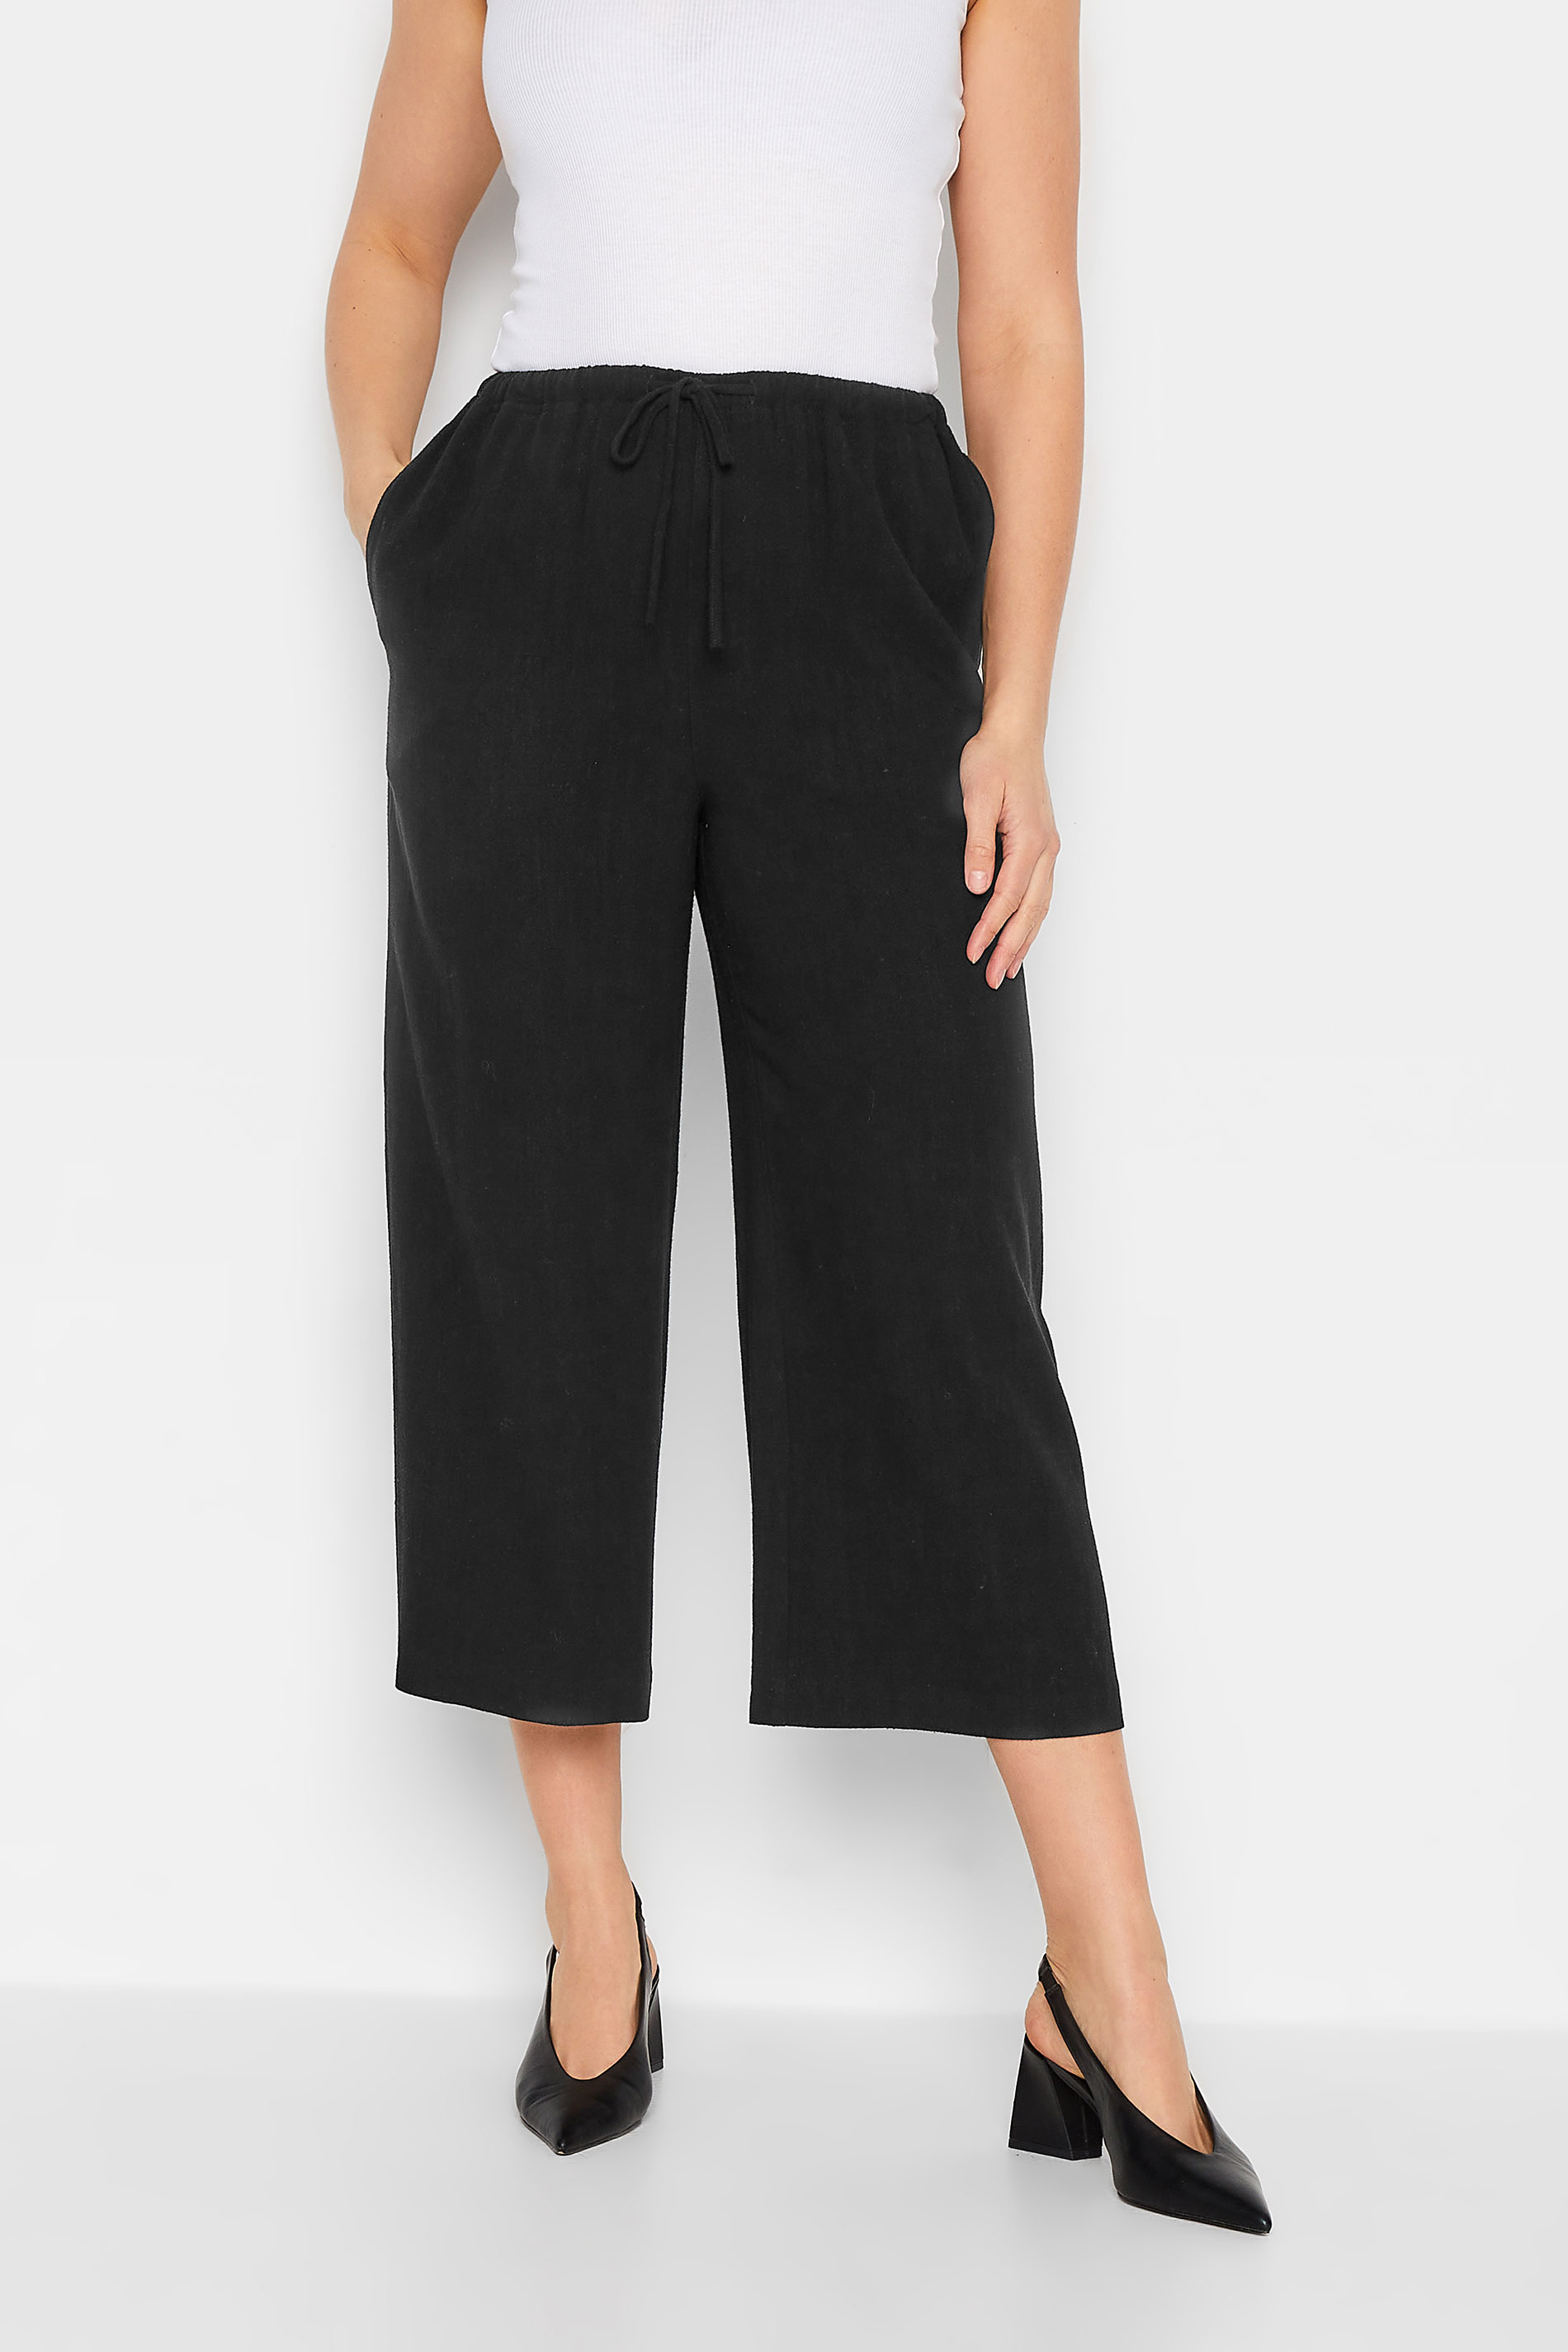 LTS Tall Black Wide Leg Cropped Linen Trousers 1